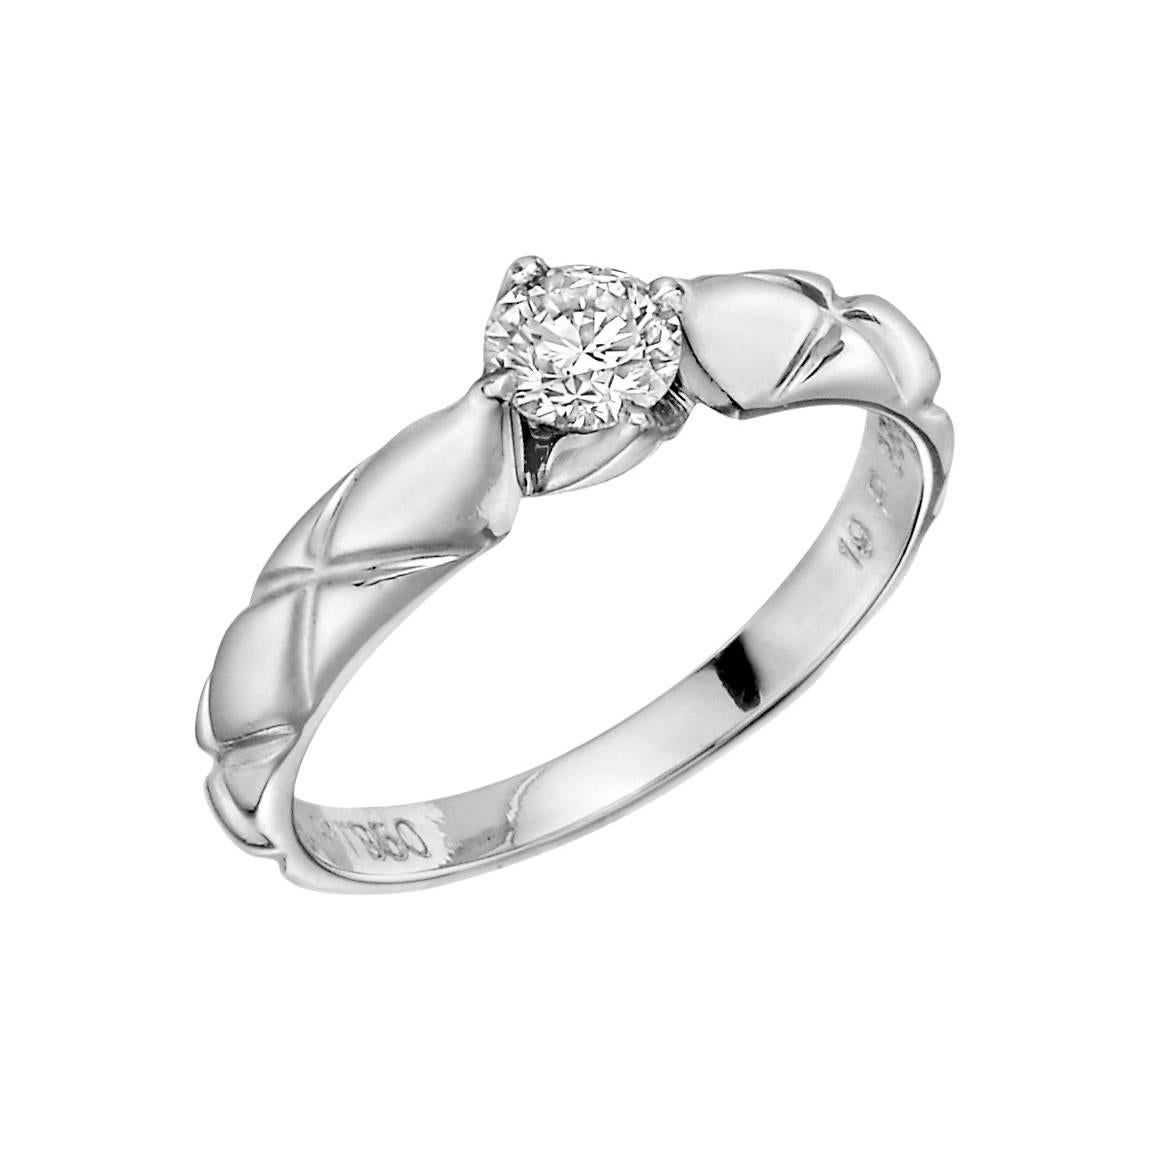 Matelasse diamond solitaire ring, designed with a band in a quilted pattern band set with a single round brilliant diamond, in platinum, style number 3392, signed Chanel. Diamond weighing approximately 0.38 carats. Ring size 6.